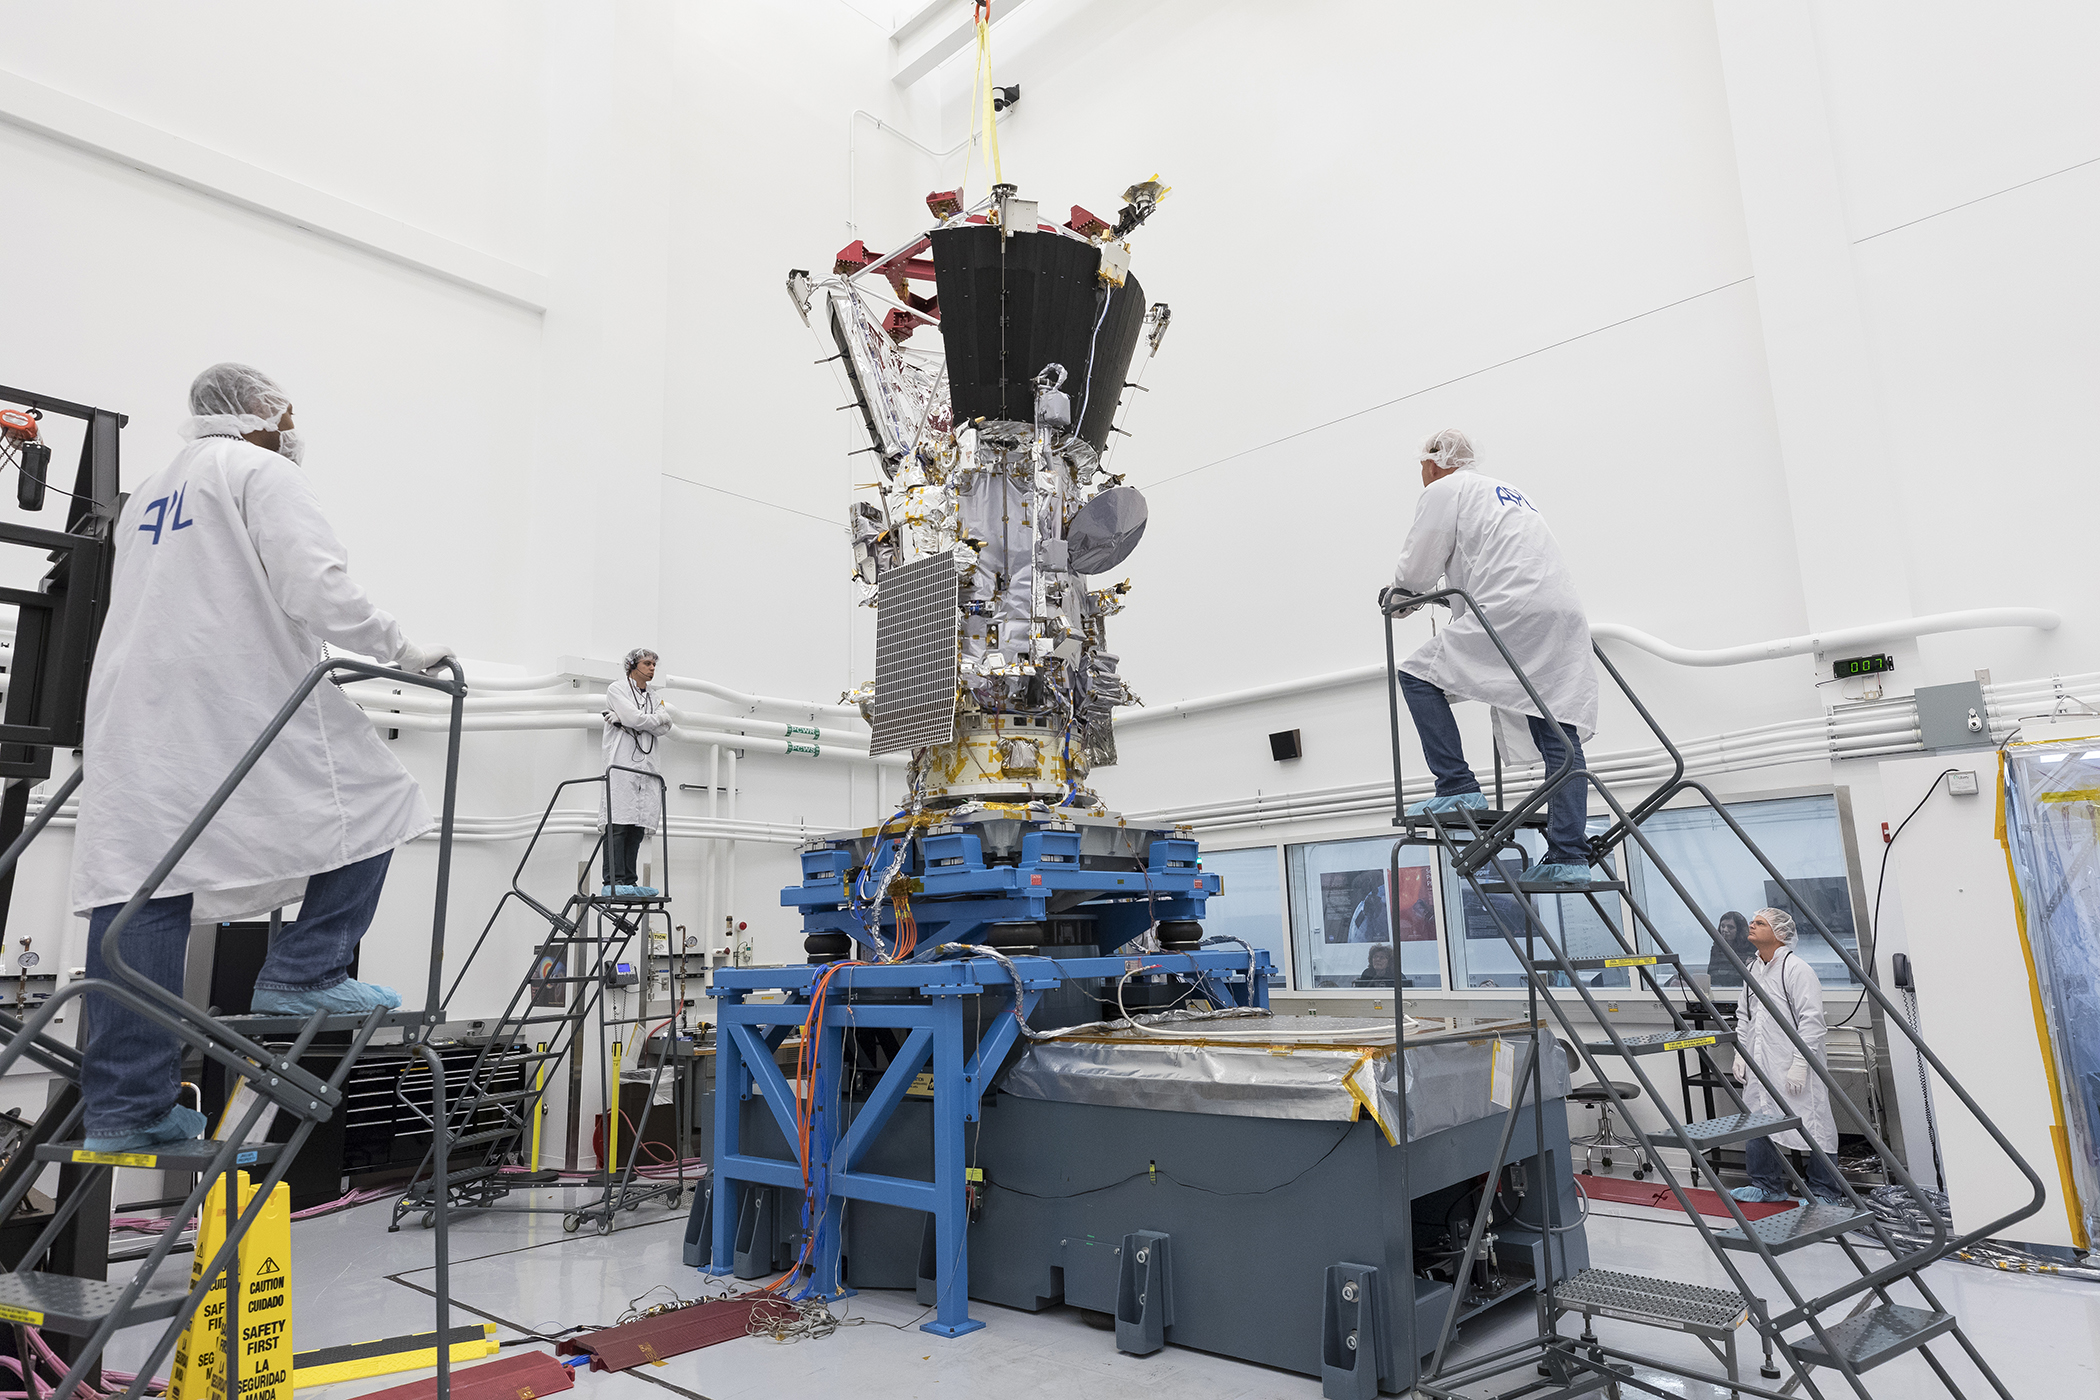 Engineers and technicians at the Johns Hopkins University Applied Physics Lab closely monitor vibration testing of NASA's Parker Solar Probe. The spacecraft is attached to a shaker table, which simulates the intense physical forces of launch and powered flight. 